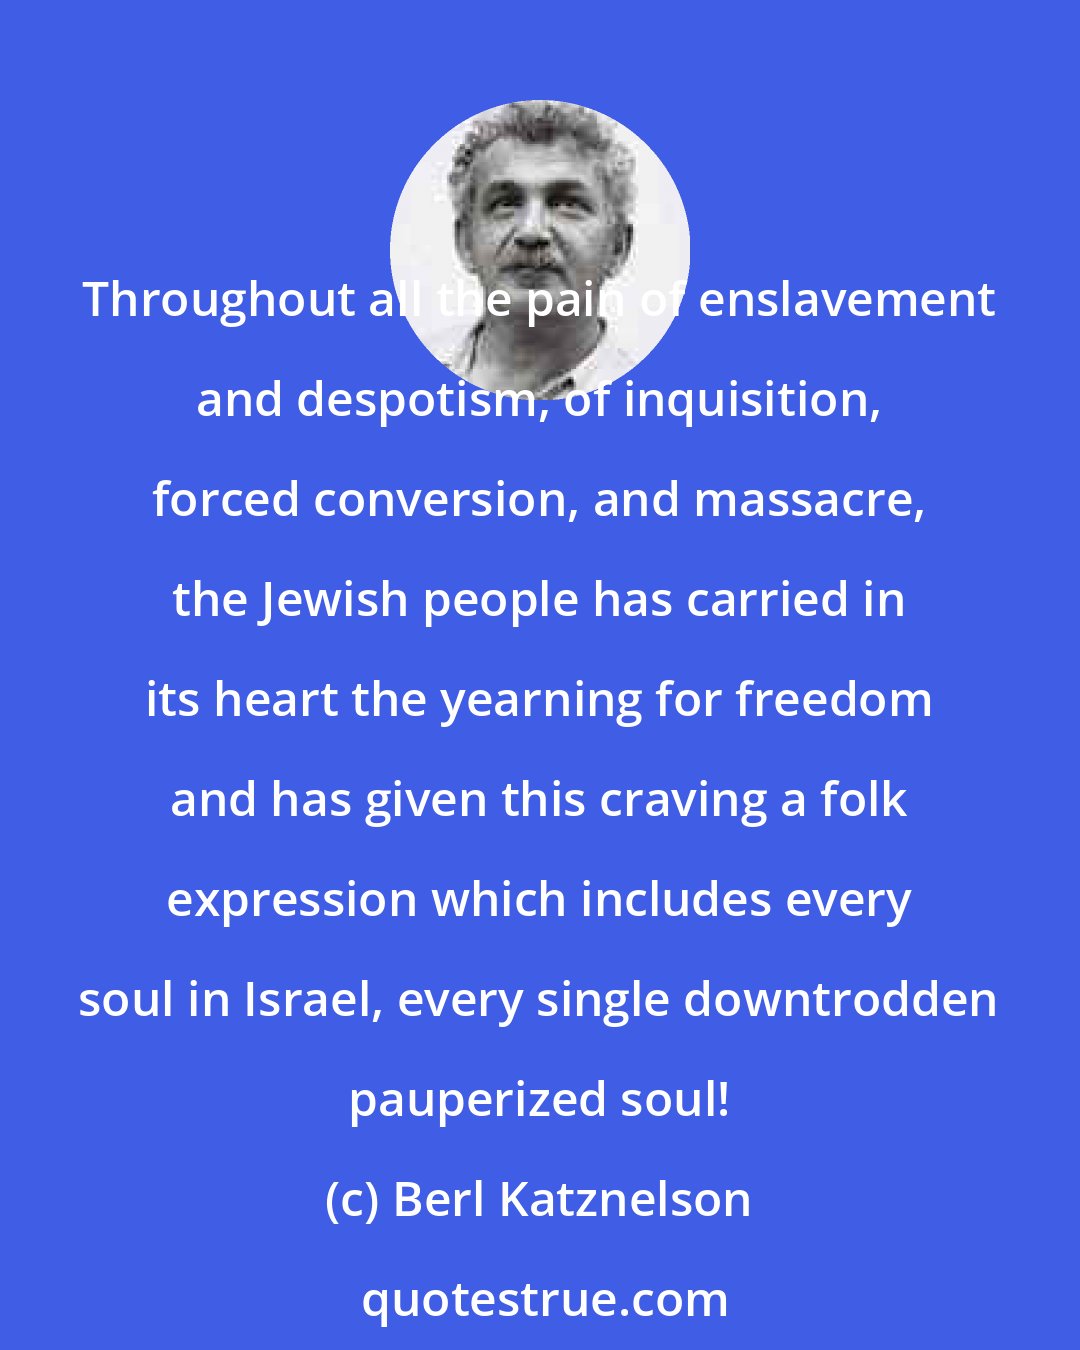 Berl Katznelson: Throughout all the pain of enslavement and despotism, of inquisition, forced conversion, and massacre, the Jewish people has carried in its heart the yearning for freedom and has given this craving a folk expression which includes every soul in Israel, every single downtrodden pauperized soul!